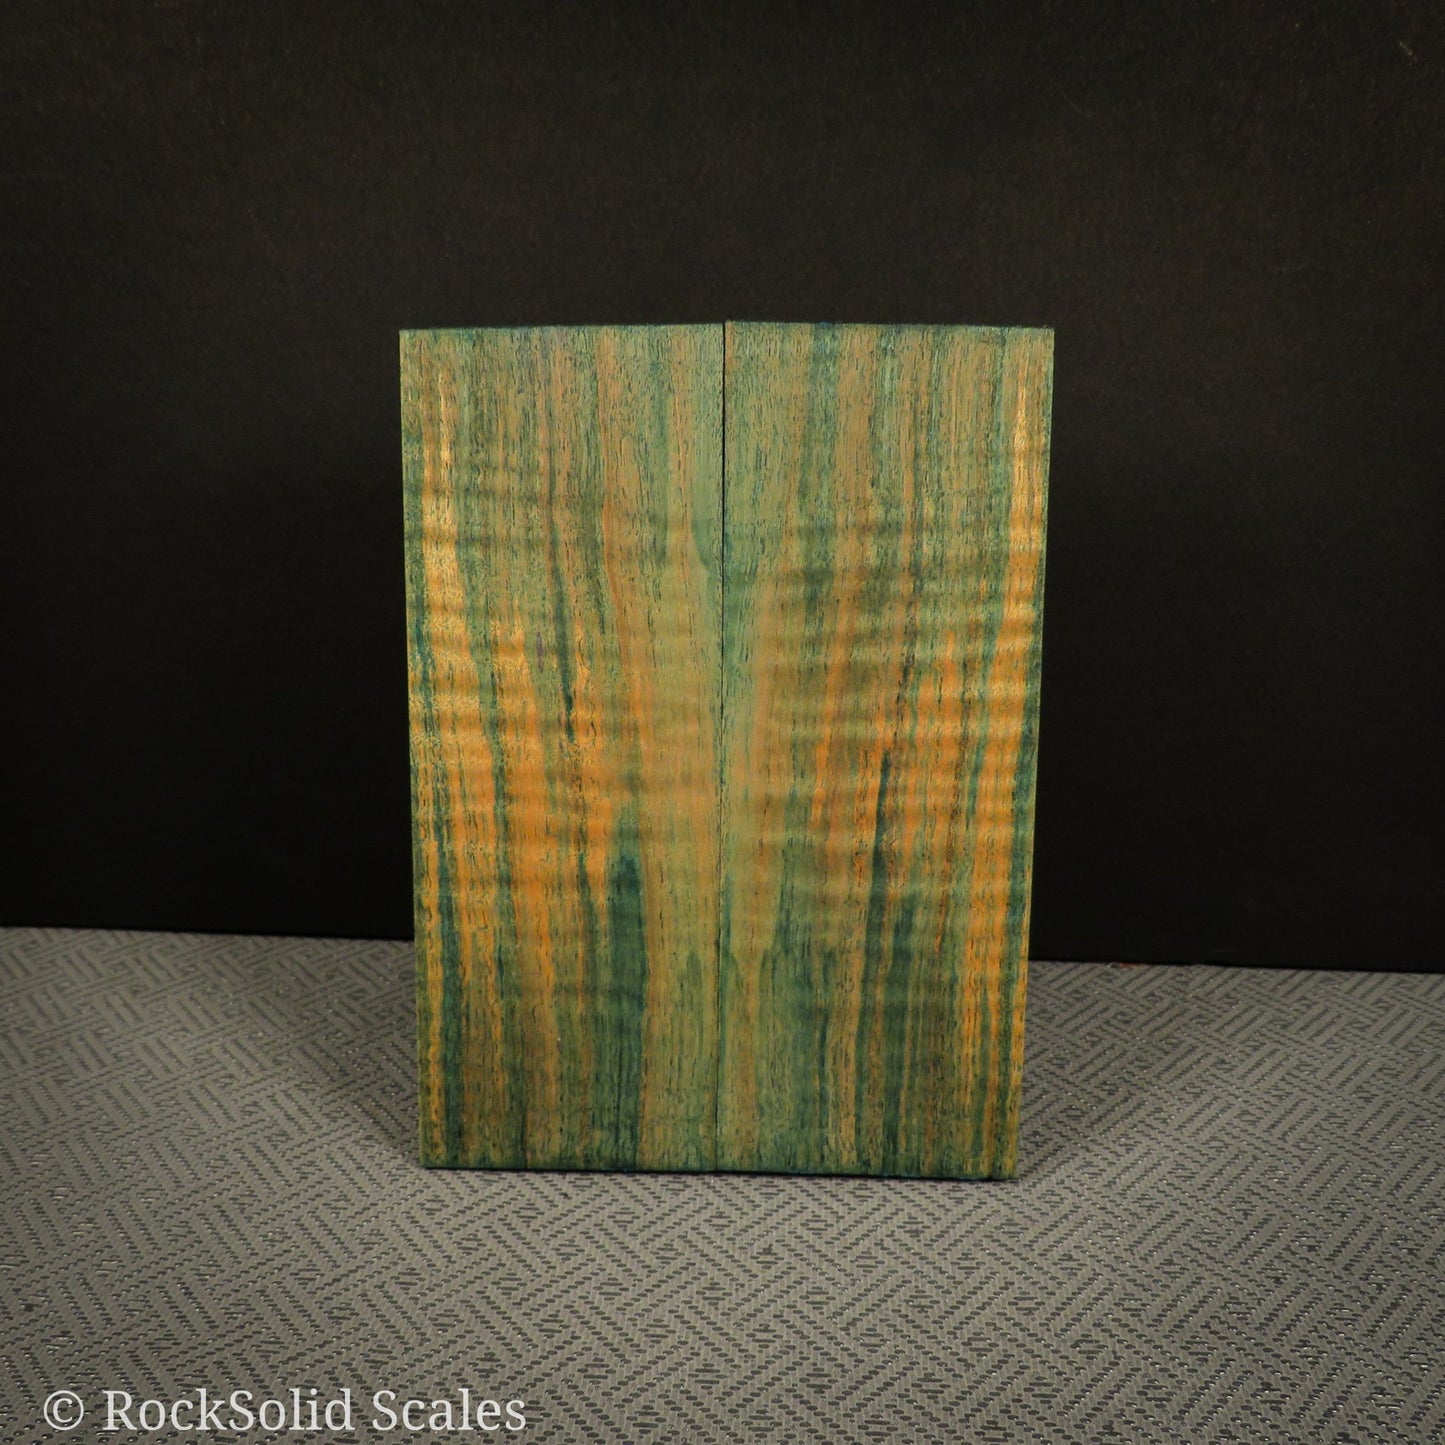 #2312 - Teal and Orange Double Dyed Curly Maple - RockSolid Scales -